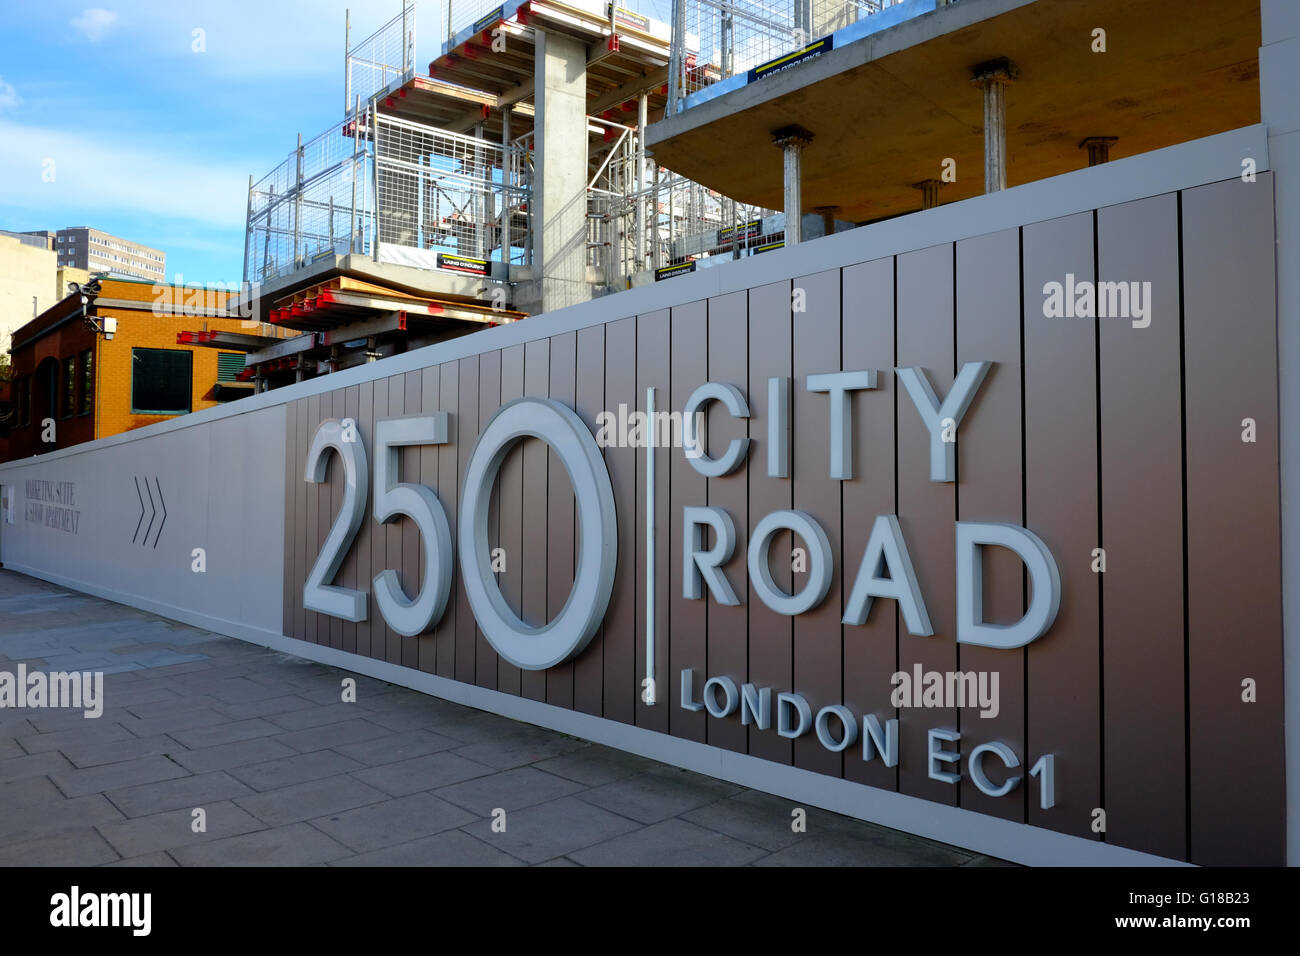 Construction Site at 250 City Road, London Stock Photo